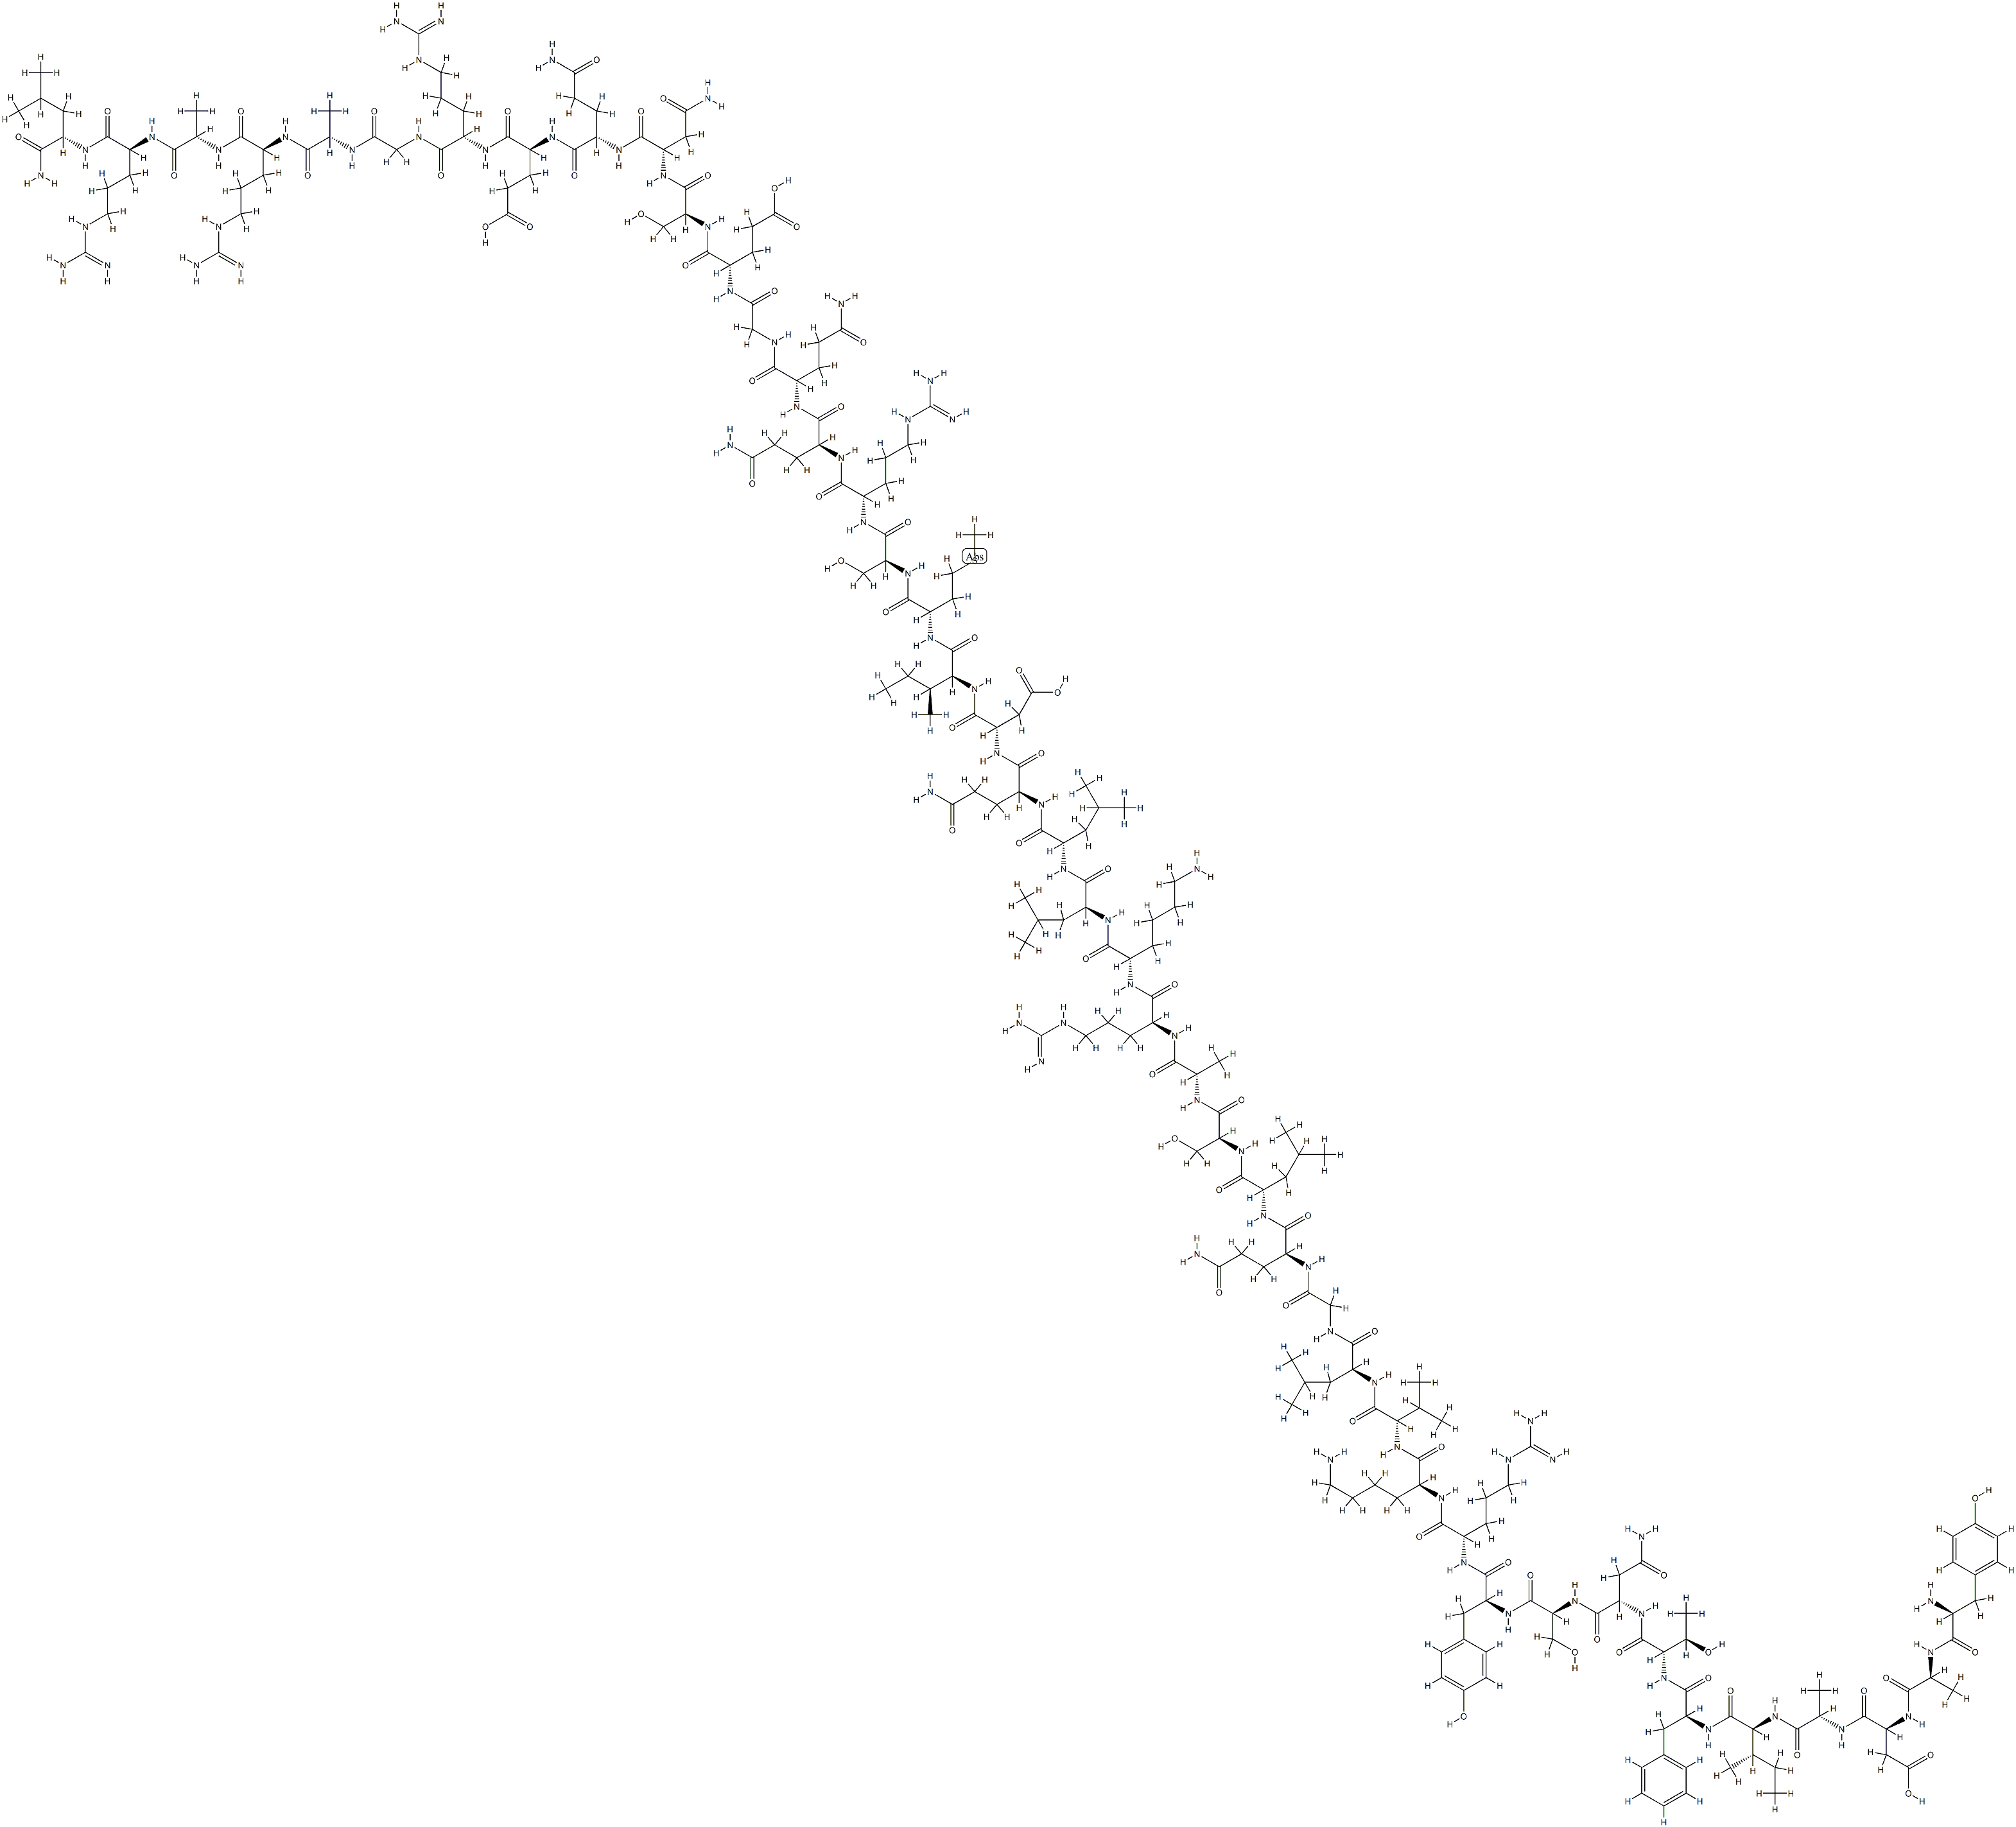 GRF (1-44) (HUMAN) Structure